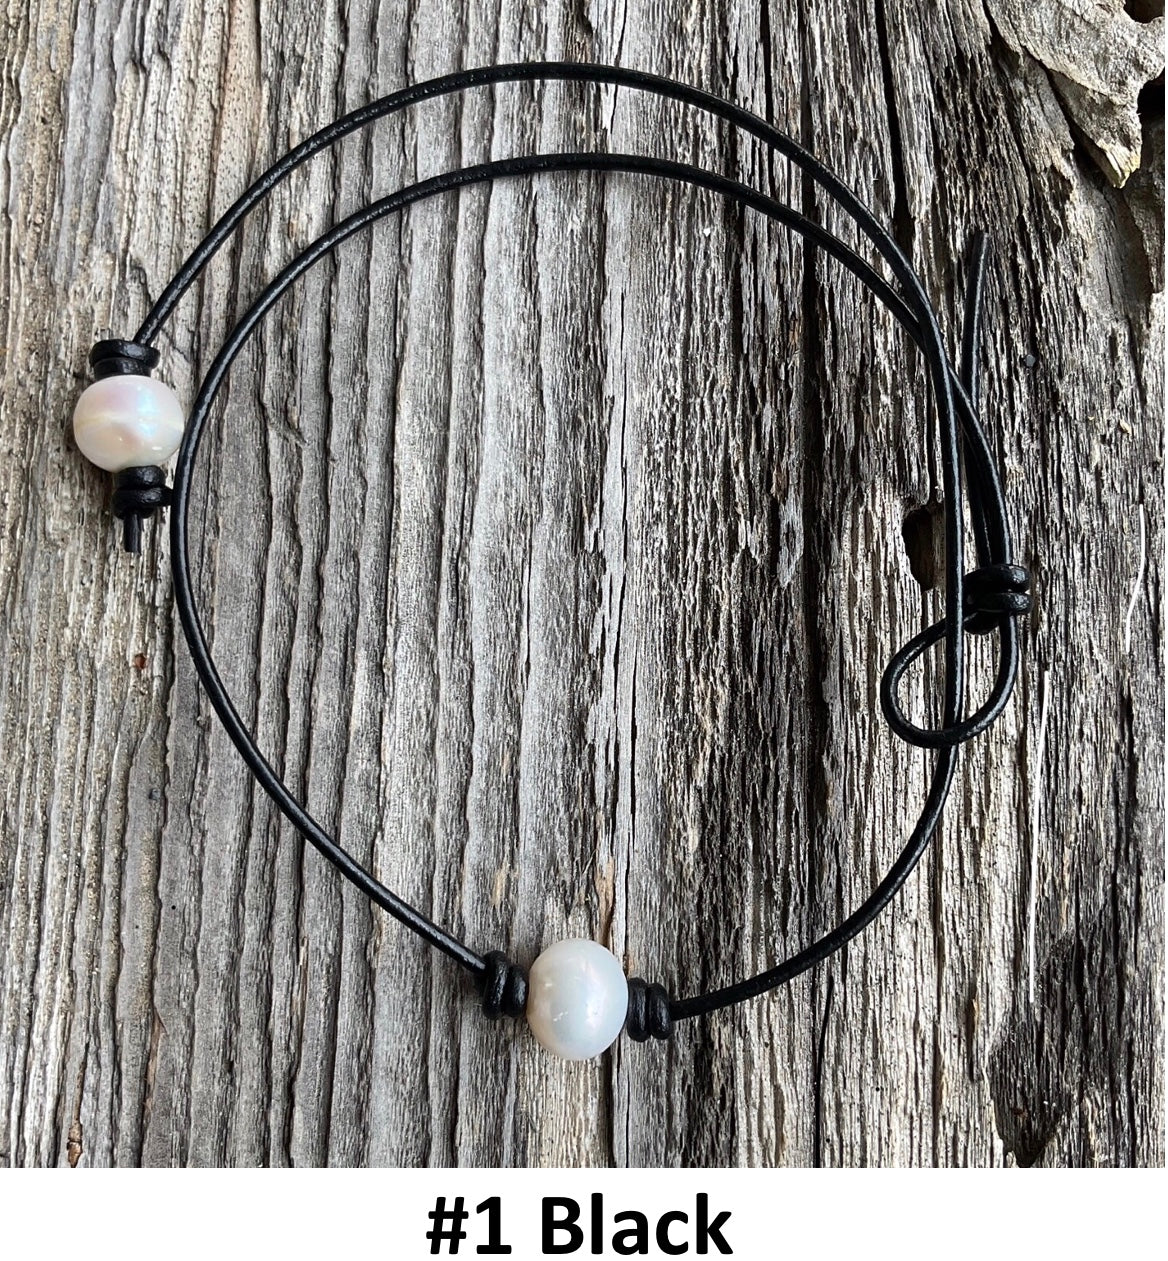 Single White Pearl Necklace, #1 Black Leather Cord